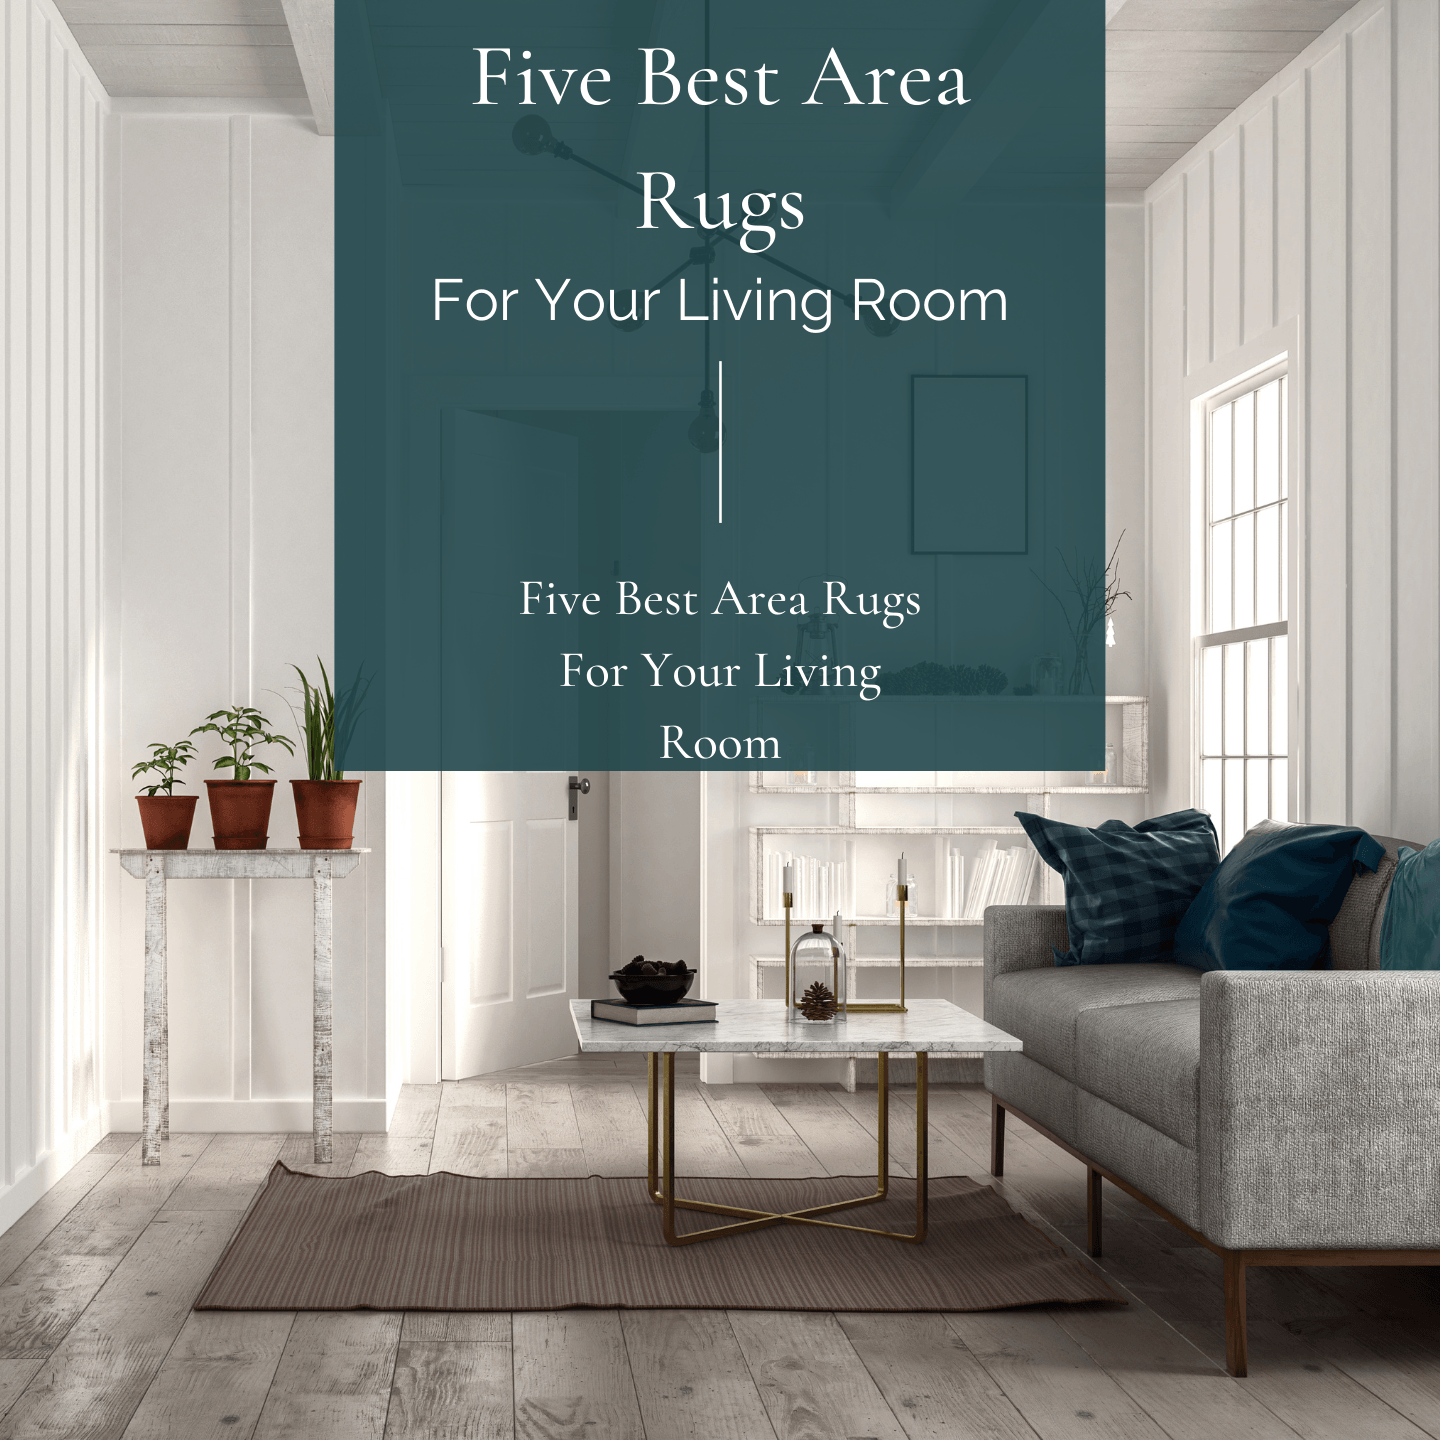 five best area rugs for your living room decor home decor galore blog